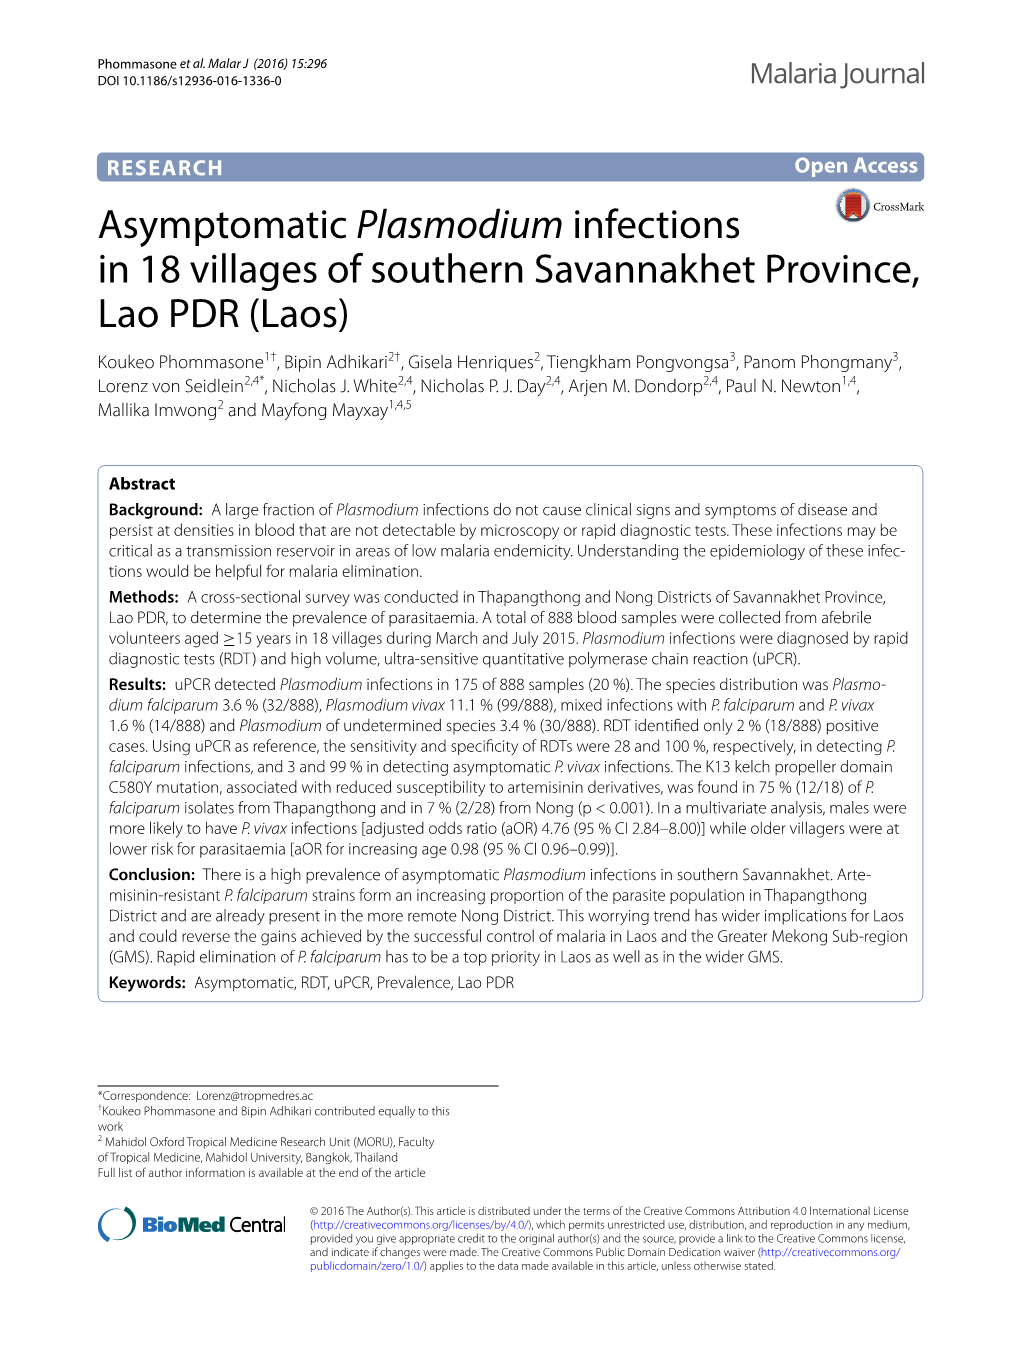 Asymptomatic Plasmodium Infections in 18 Villages Of